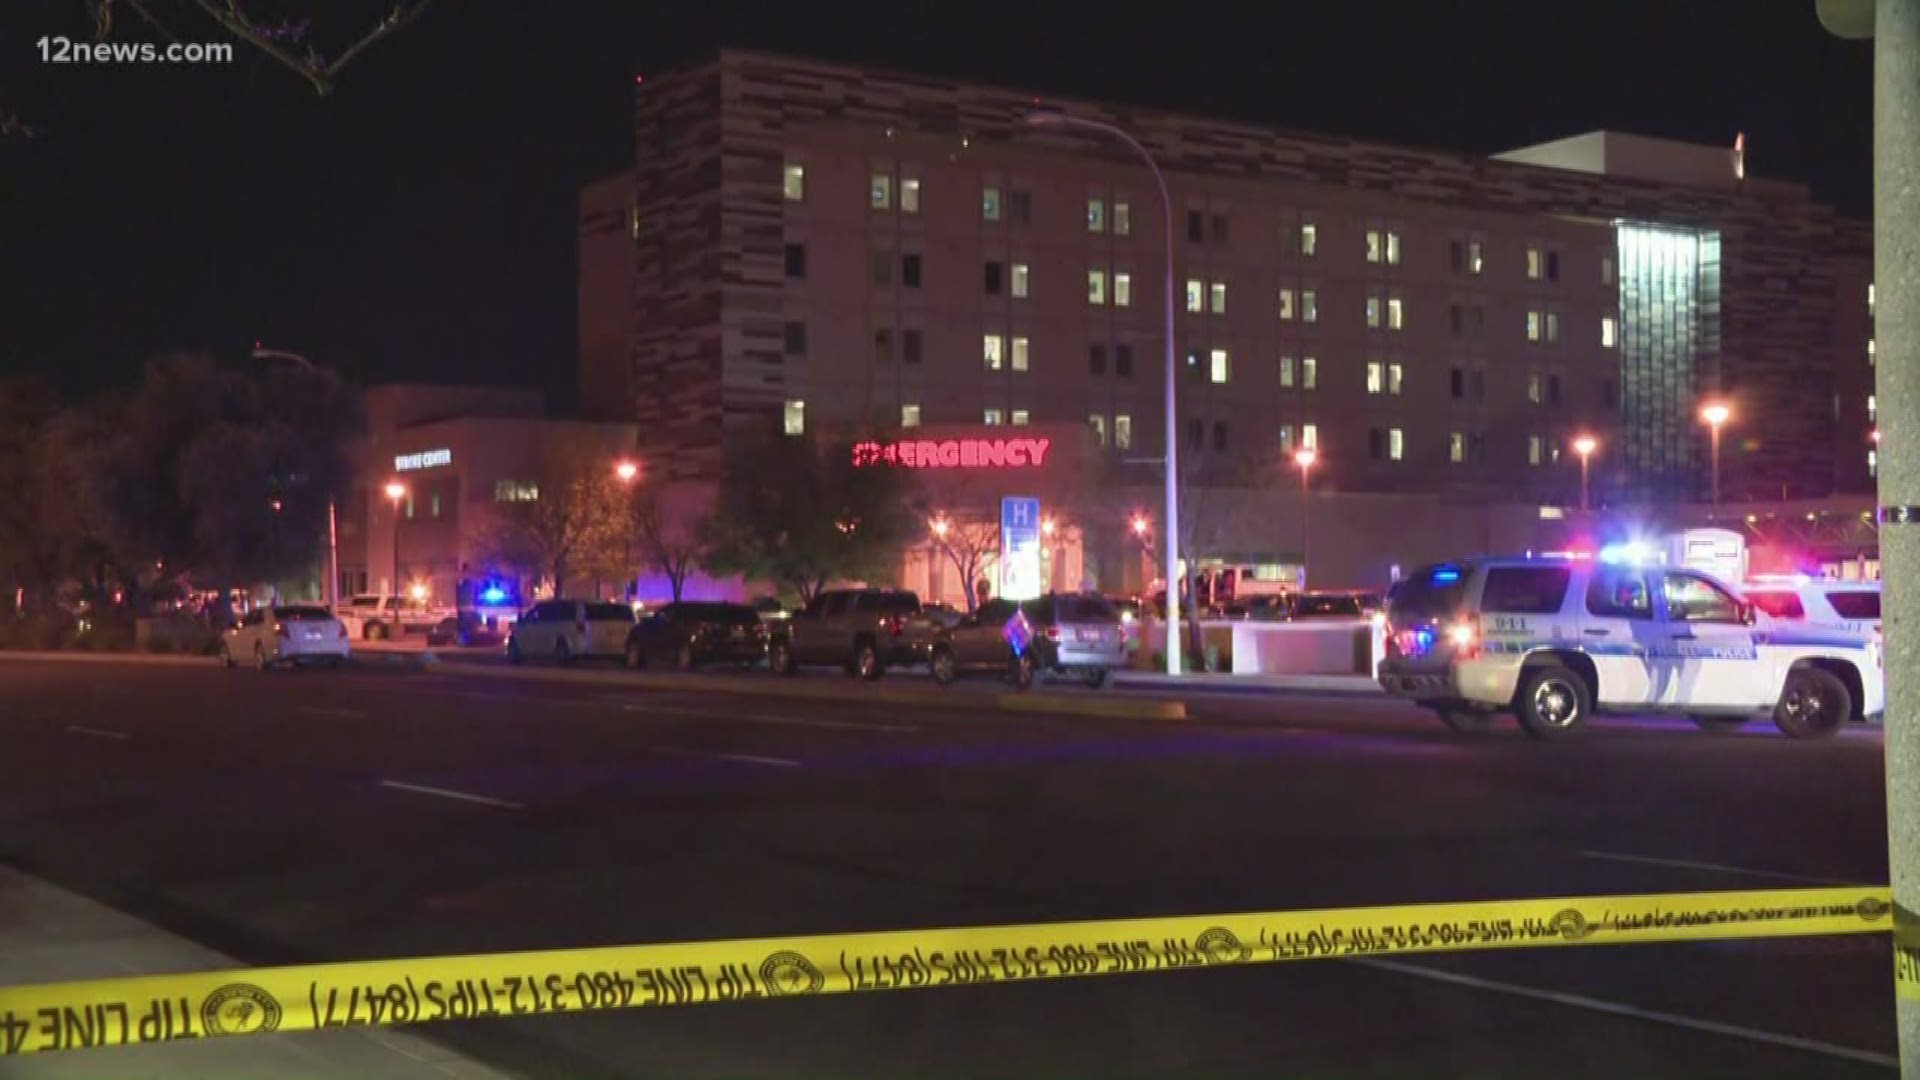 Police said the man was brandishing a rifle and pulled a knife on officers outside the emergency department.